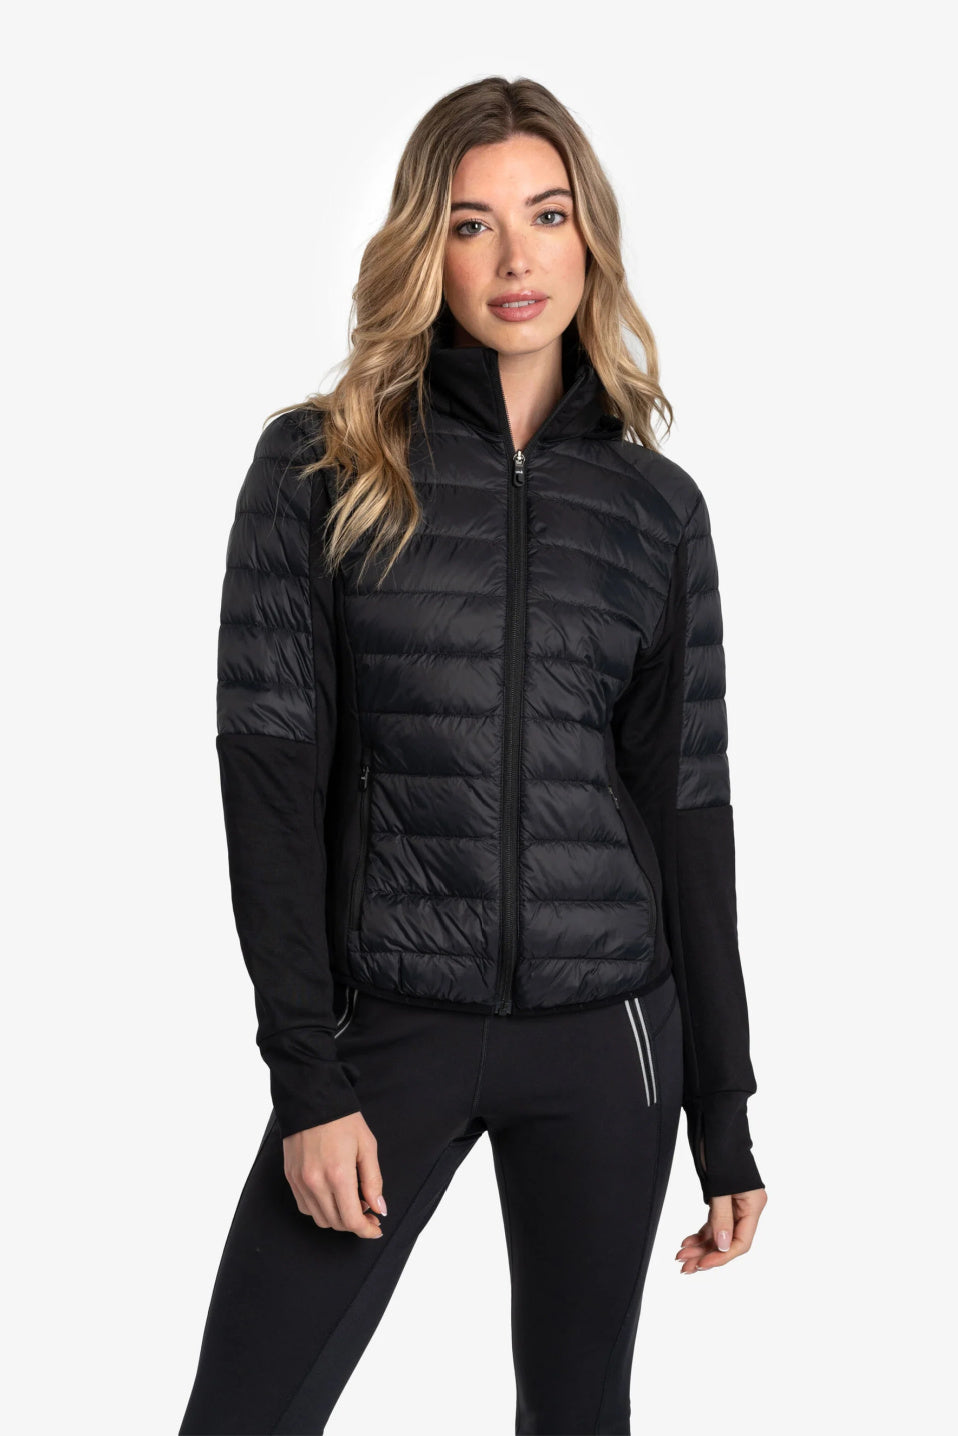 Lolë Just Windproof Insulated Jacket